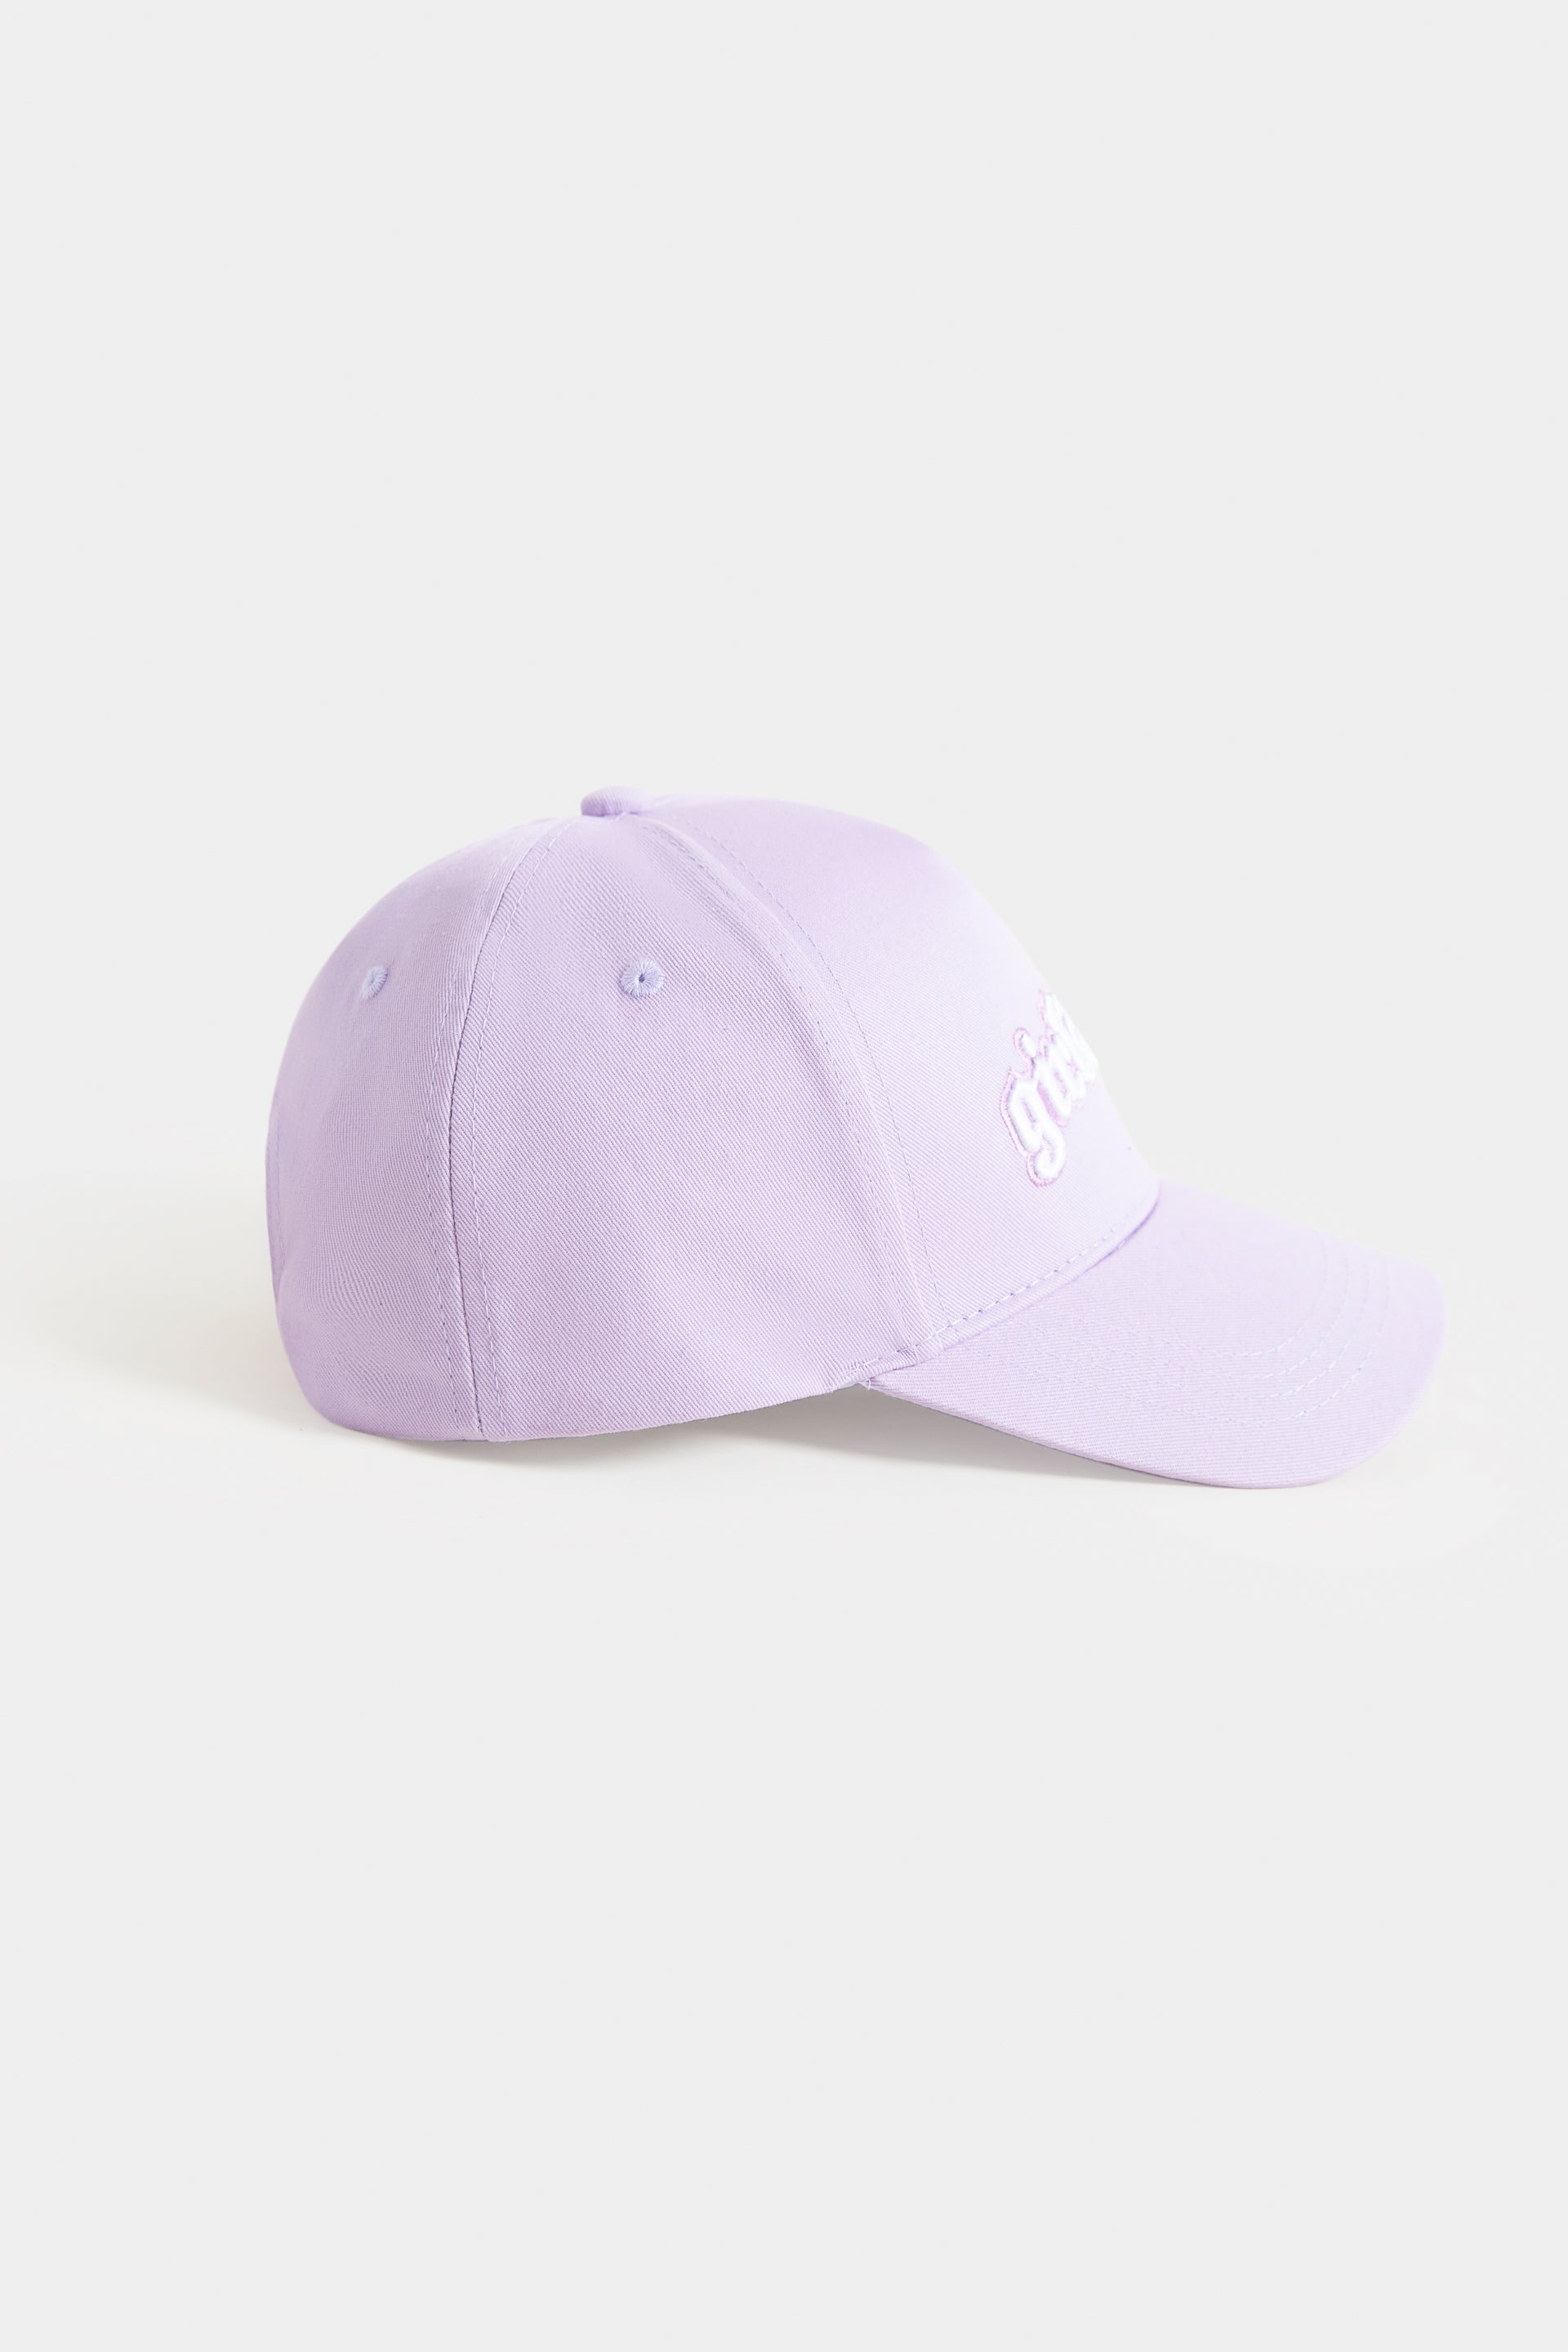 Girls Club Embroidered Cap